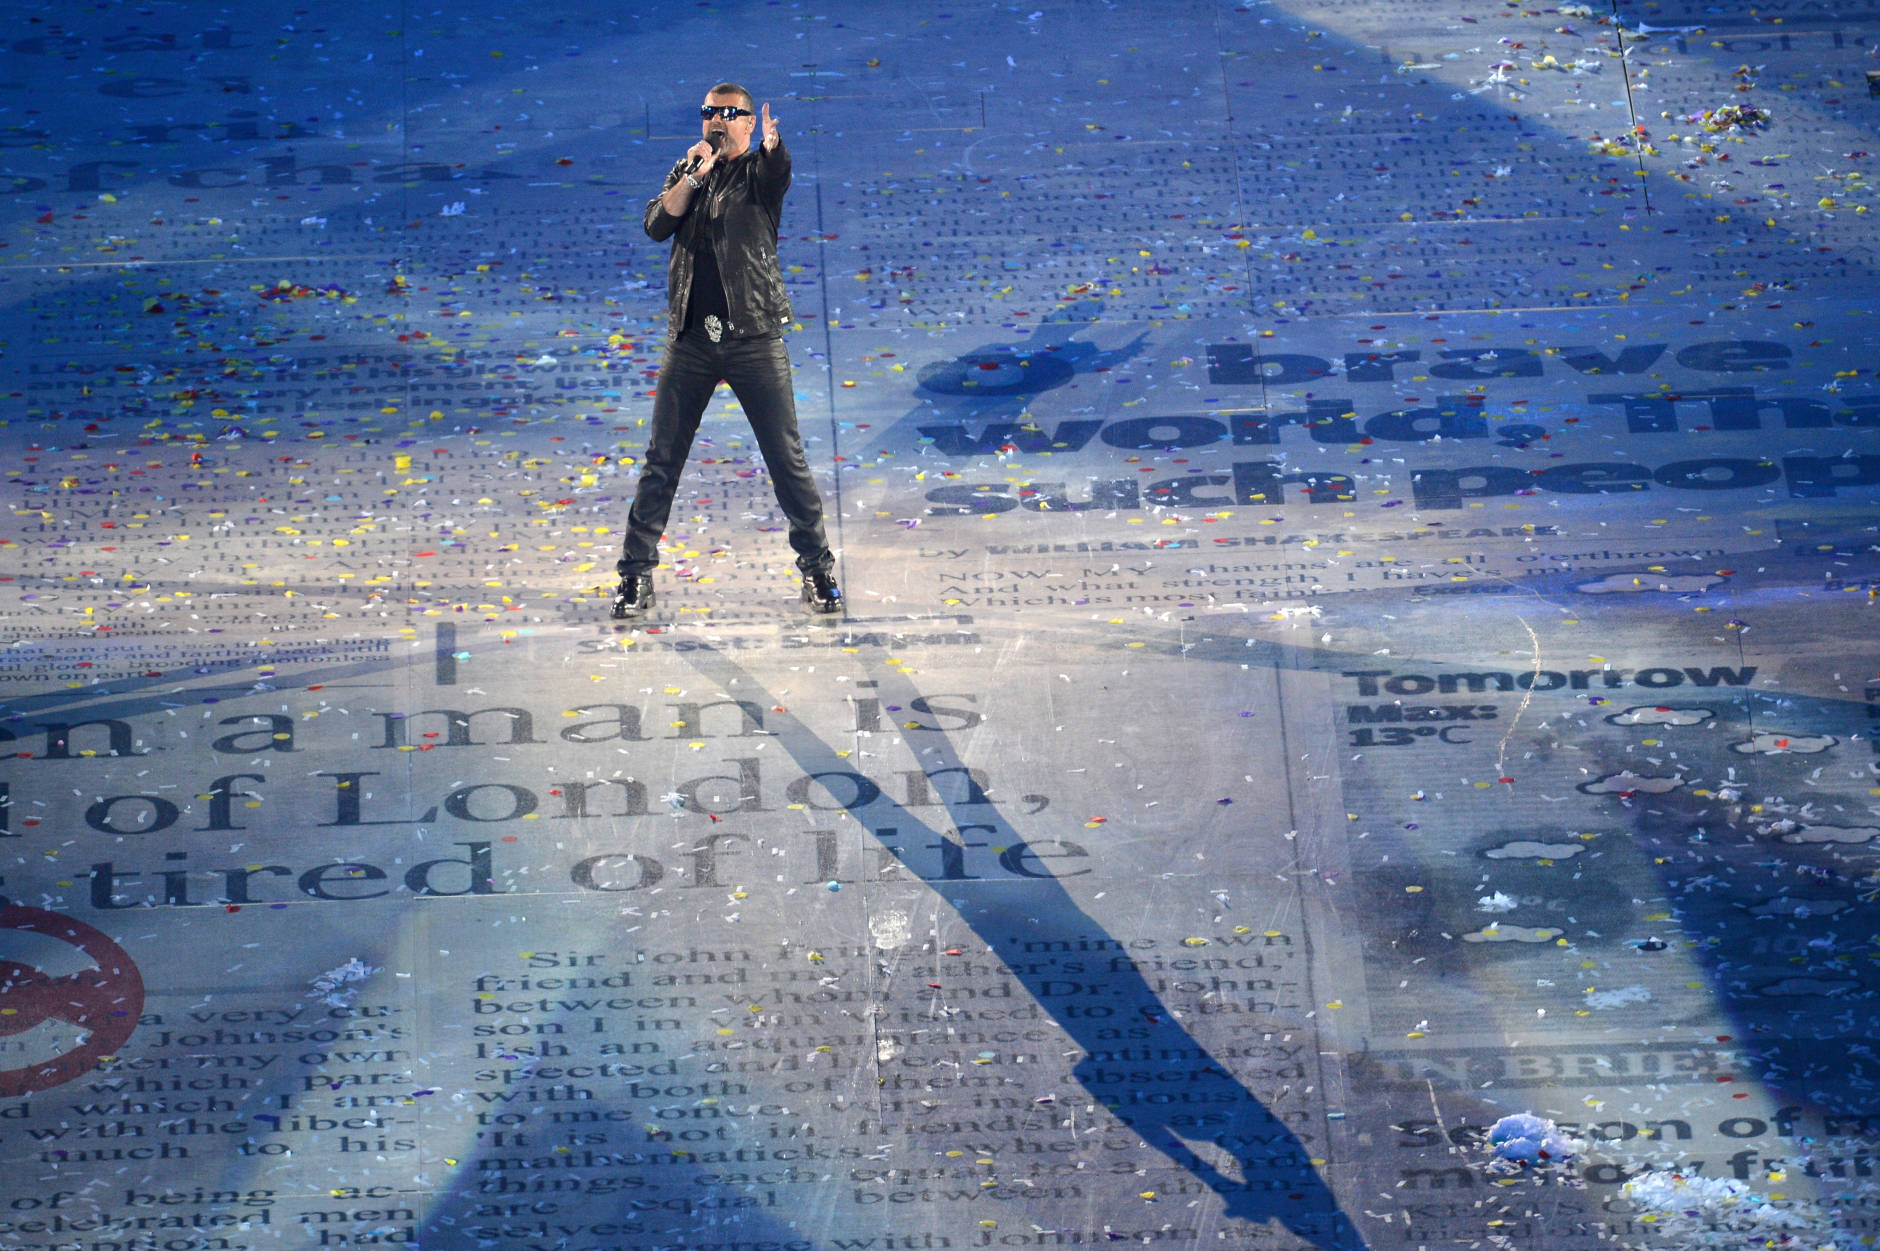 LONDON, ENGLAND - AUGUST 12:  Global artist George Michael performs during the Closing Ceremony on Day 16 of the London 2012 Olympic Games at Olympic Stadium on August 12, 2012 in London, England.  (Photo by Stu Forster/Getty Images)